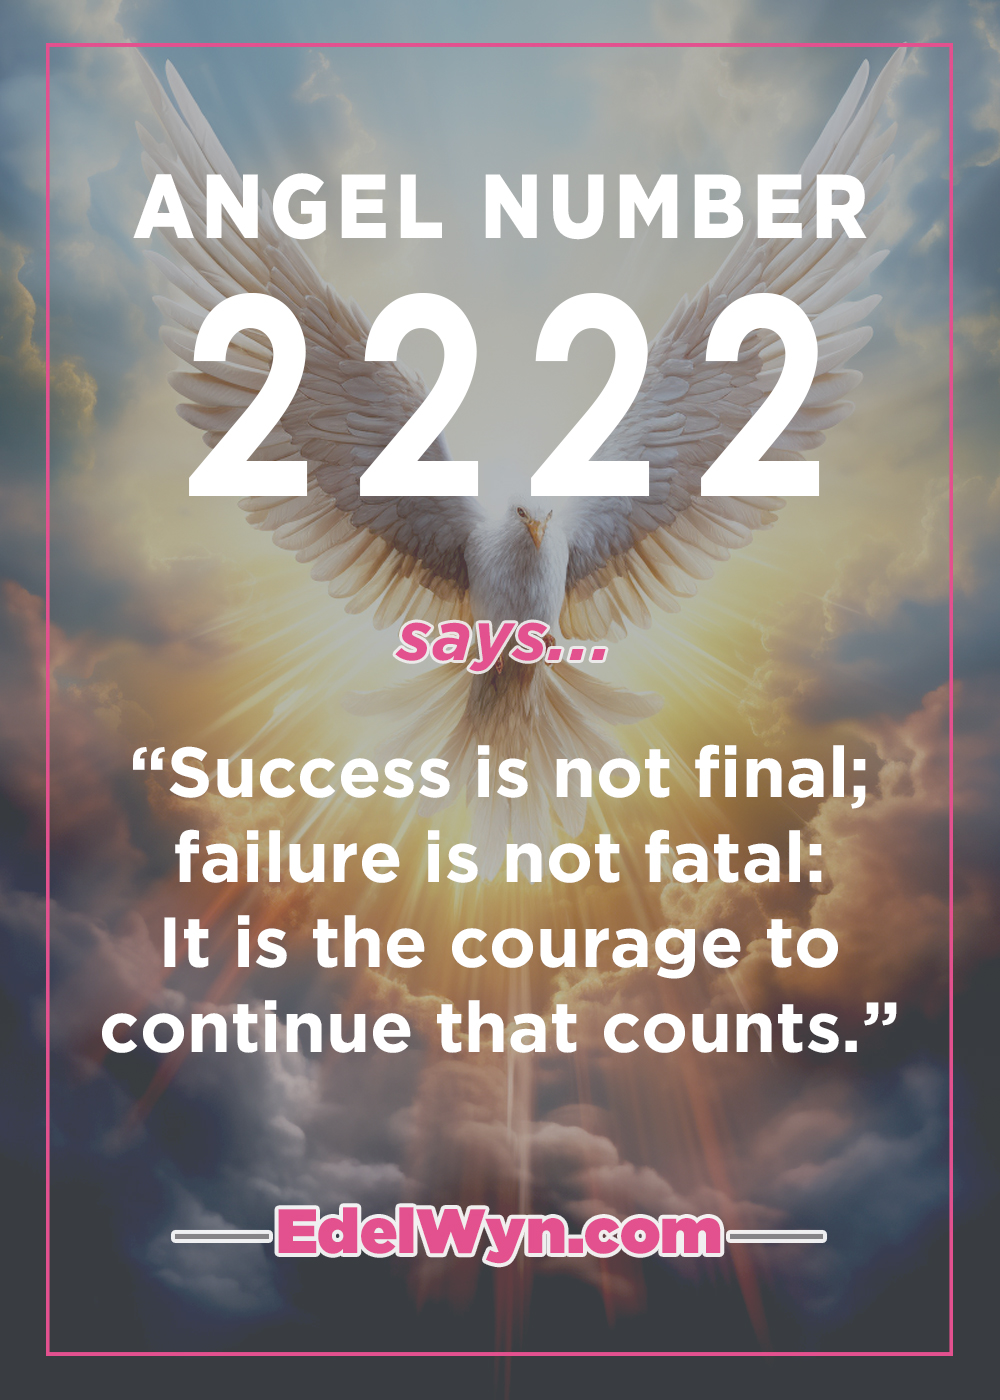 Don't Make This Mistake When It Comes To Angel Number 2222…